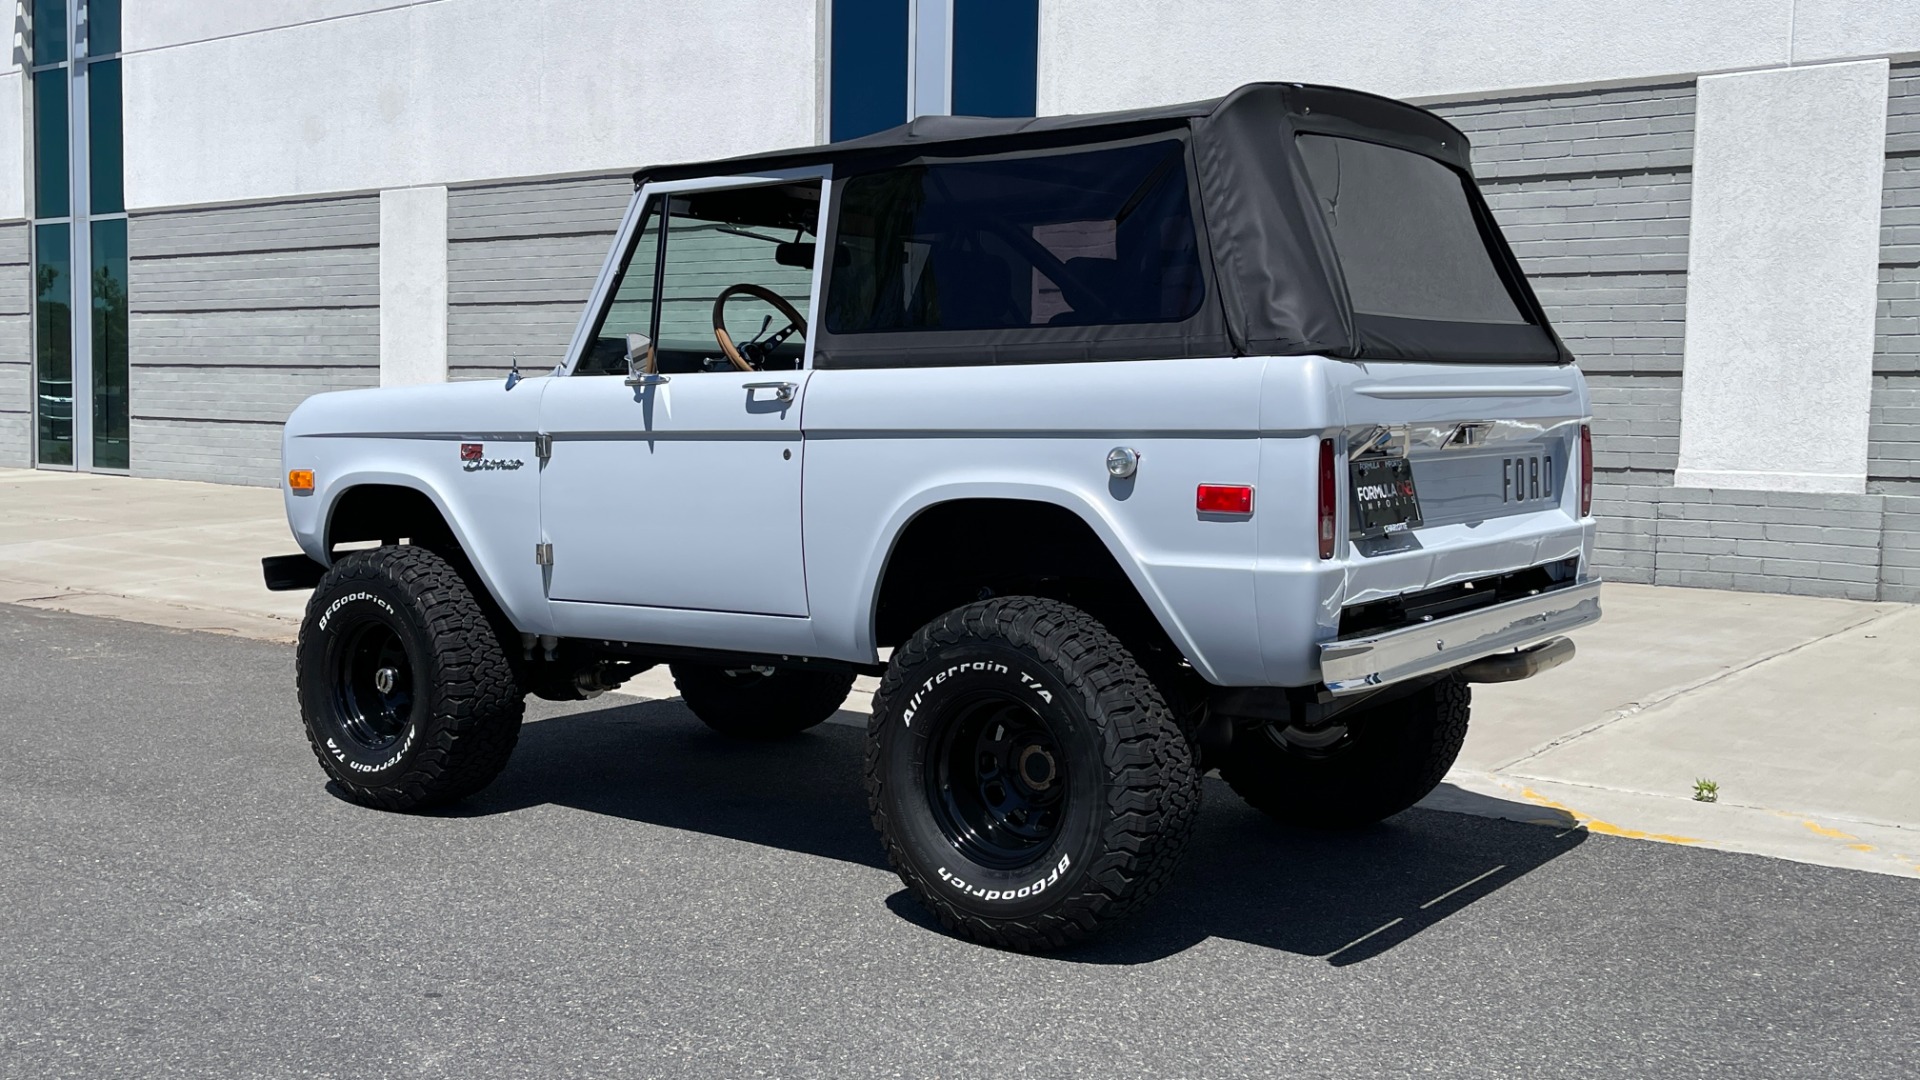 Used 1976 Ford BRONCO RESTO-MOD 4X4 / COYOTE 5.0L / AUTO / HTD STS / ALL NEW / LOW MILES for sale $239,999 at Formula Imports in Charlotte NC 28227 4